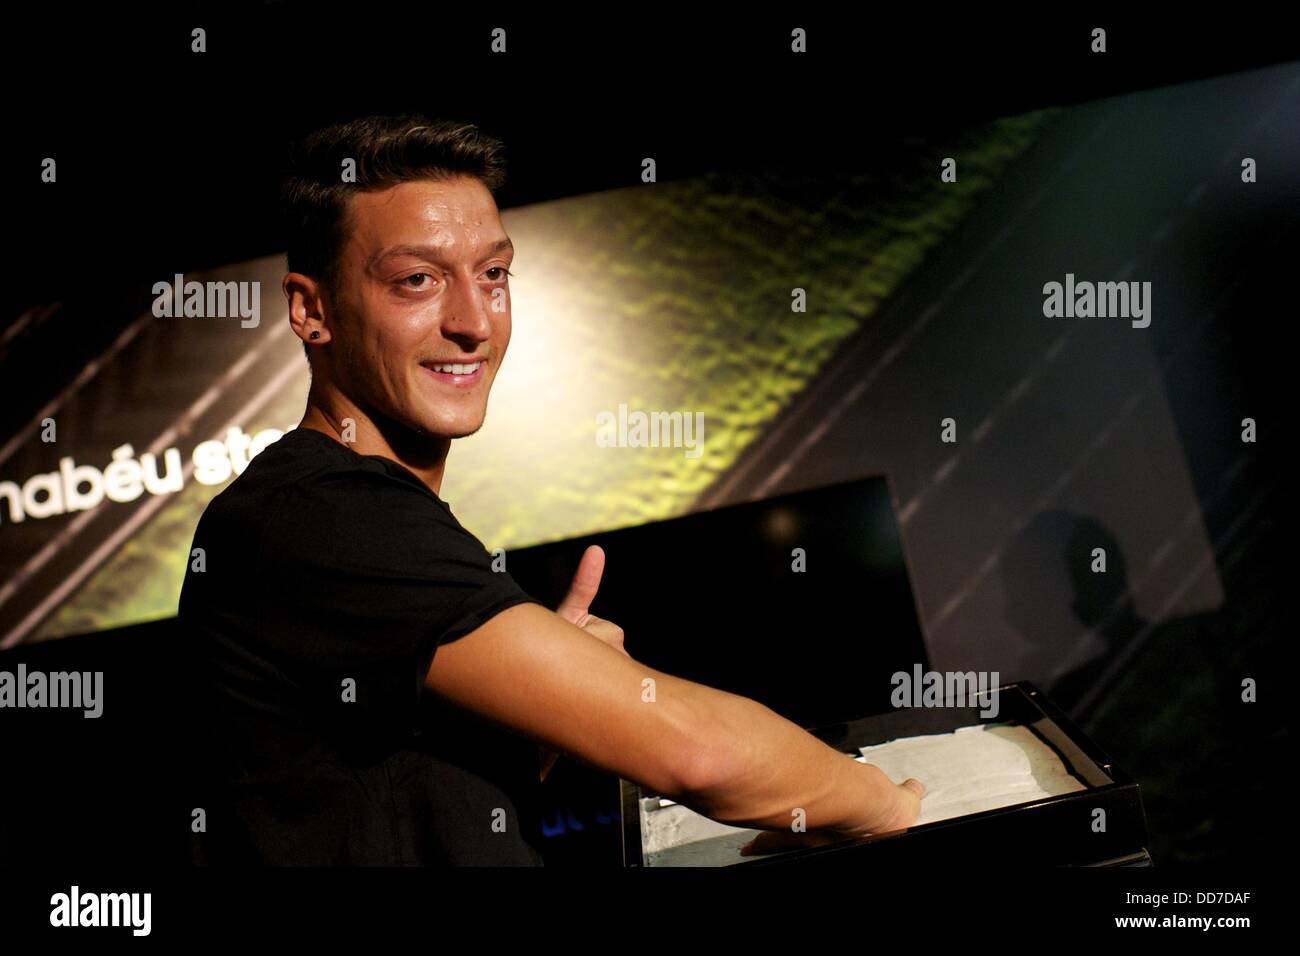 Madrid, Spain. 28th Aug, 2013. Real Madrid Player Mesut Ozil joins Adidas Family at Santiago Bernabeu Adidas Store on August 28, 2013 in Madrid Credit:  Jack Abuin/ZUMAPRESS.com/Alamy Live News Stock Photo